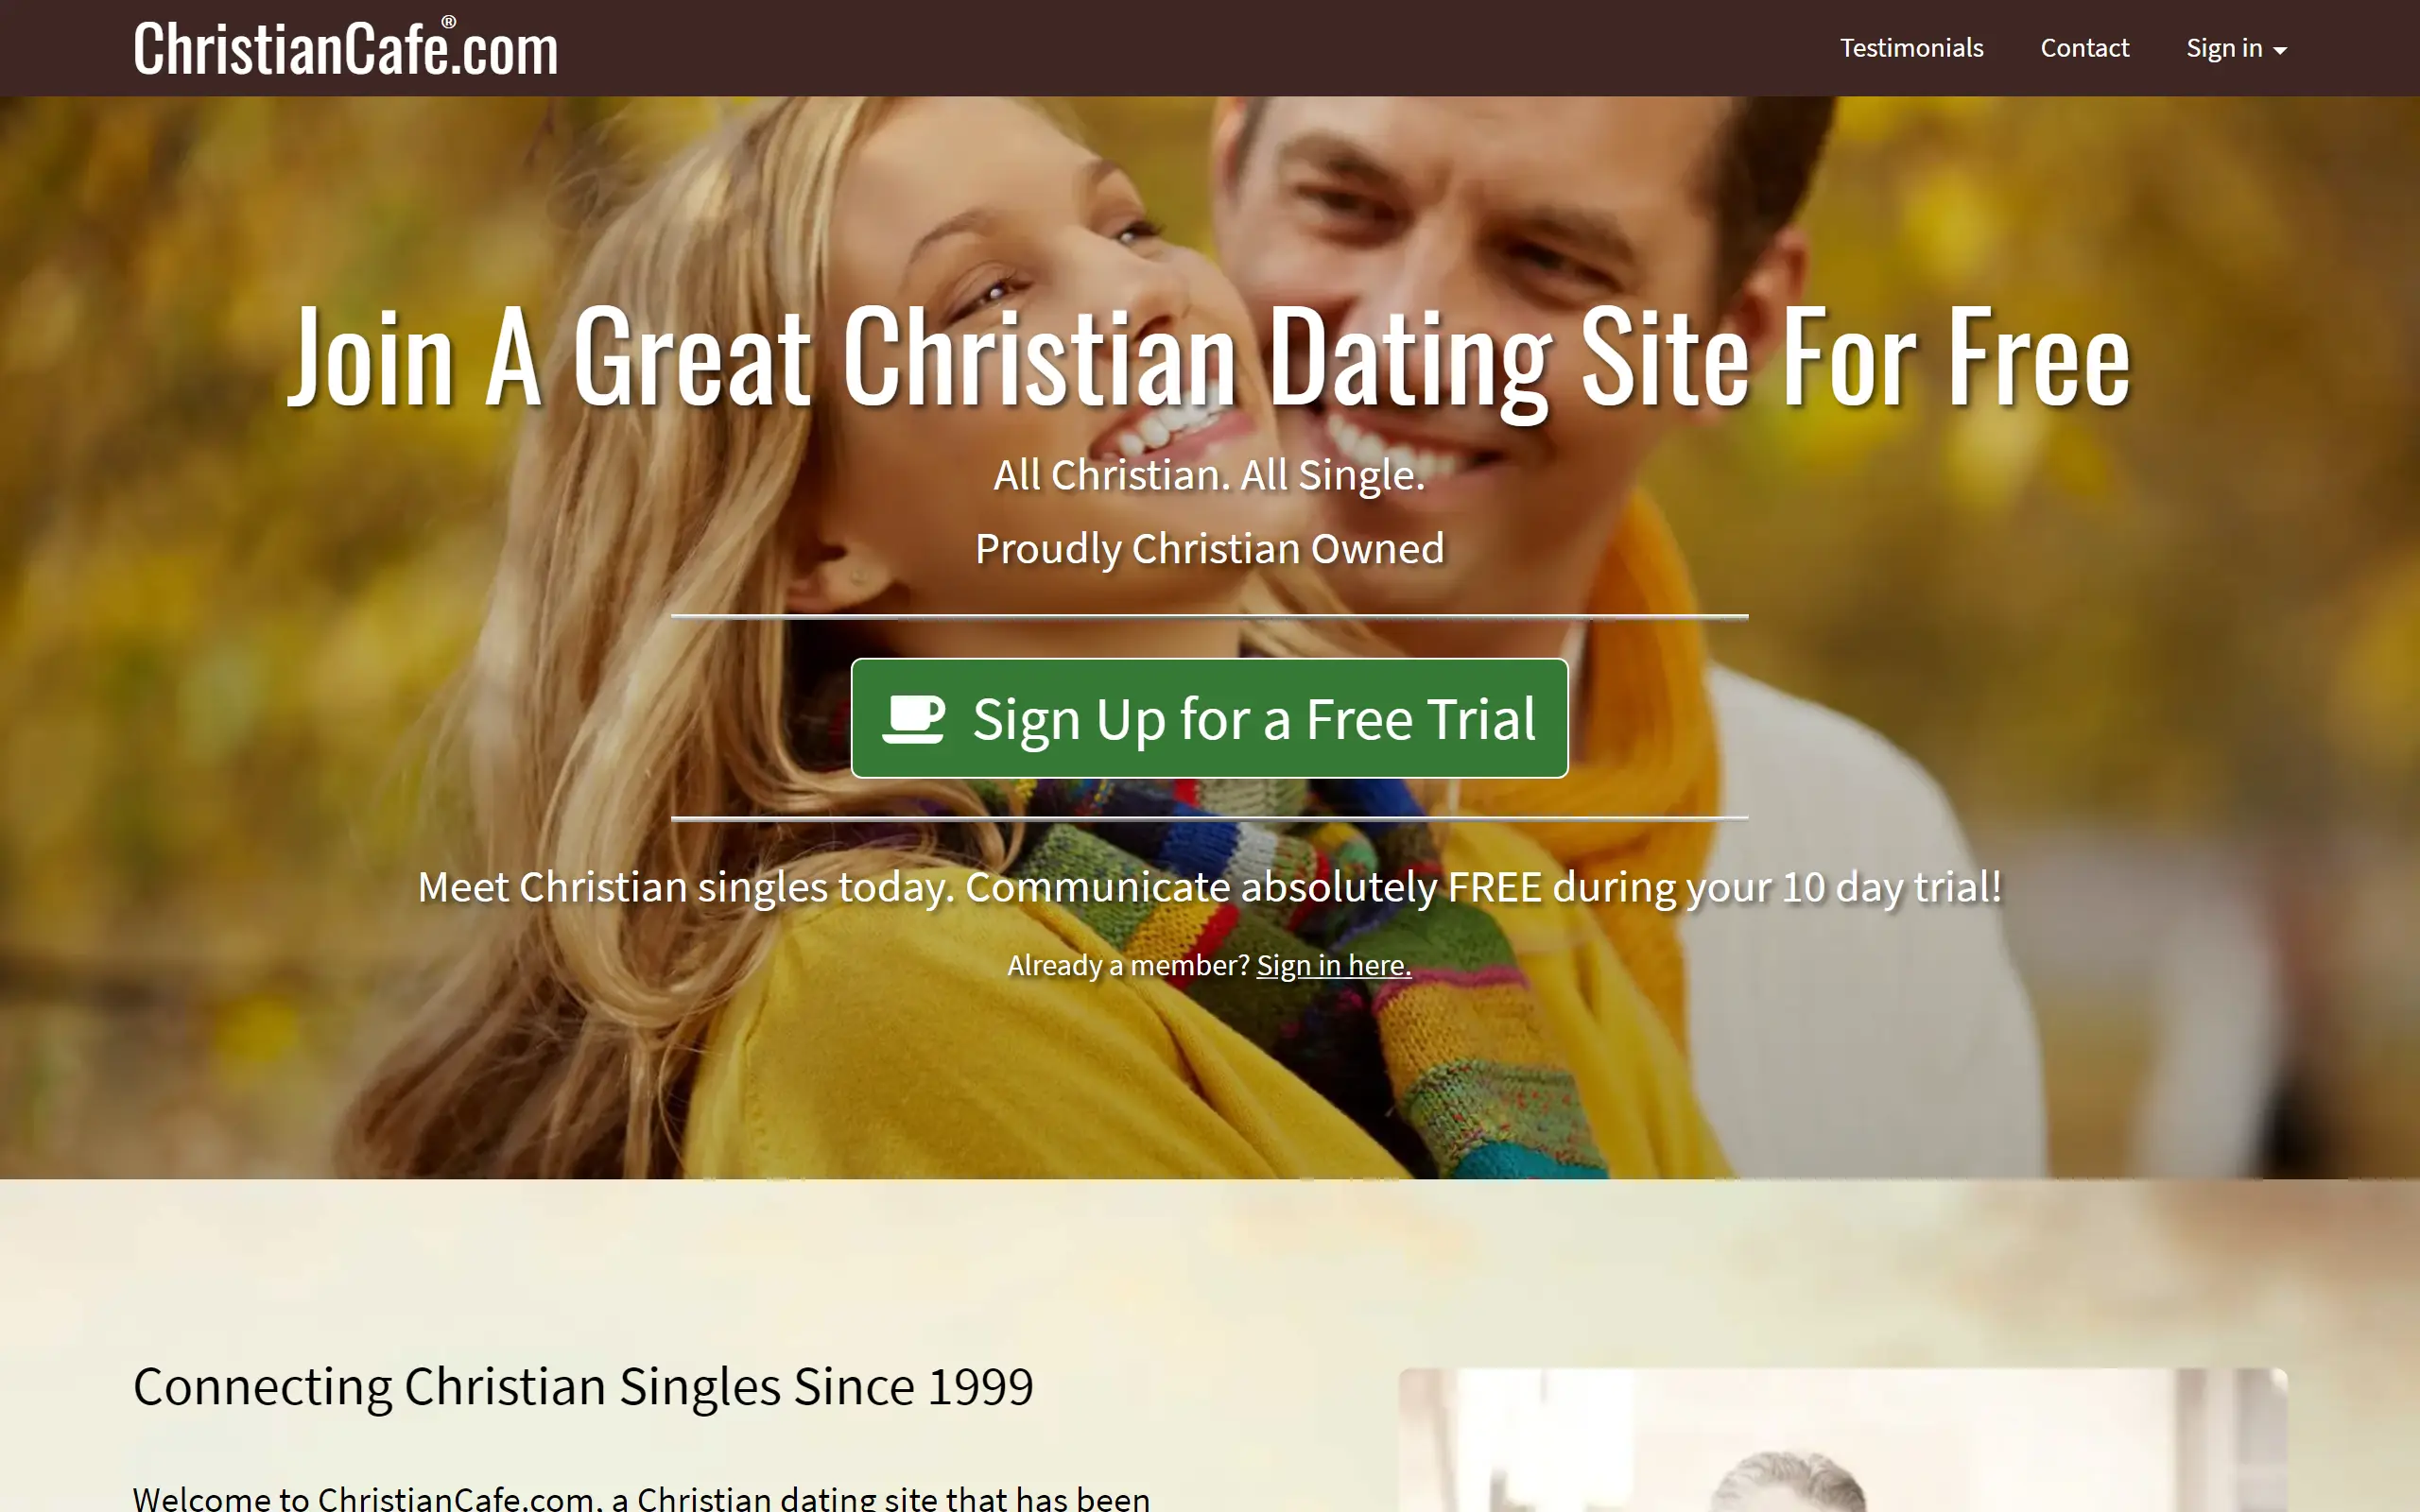 Christian Cafe dating site homepage featuring a Christian couple in winter clothing while it snows.